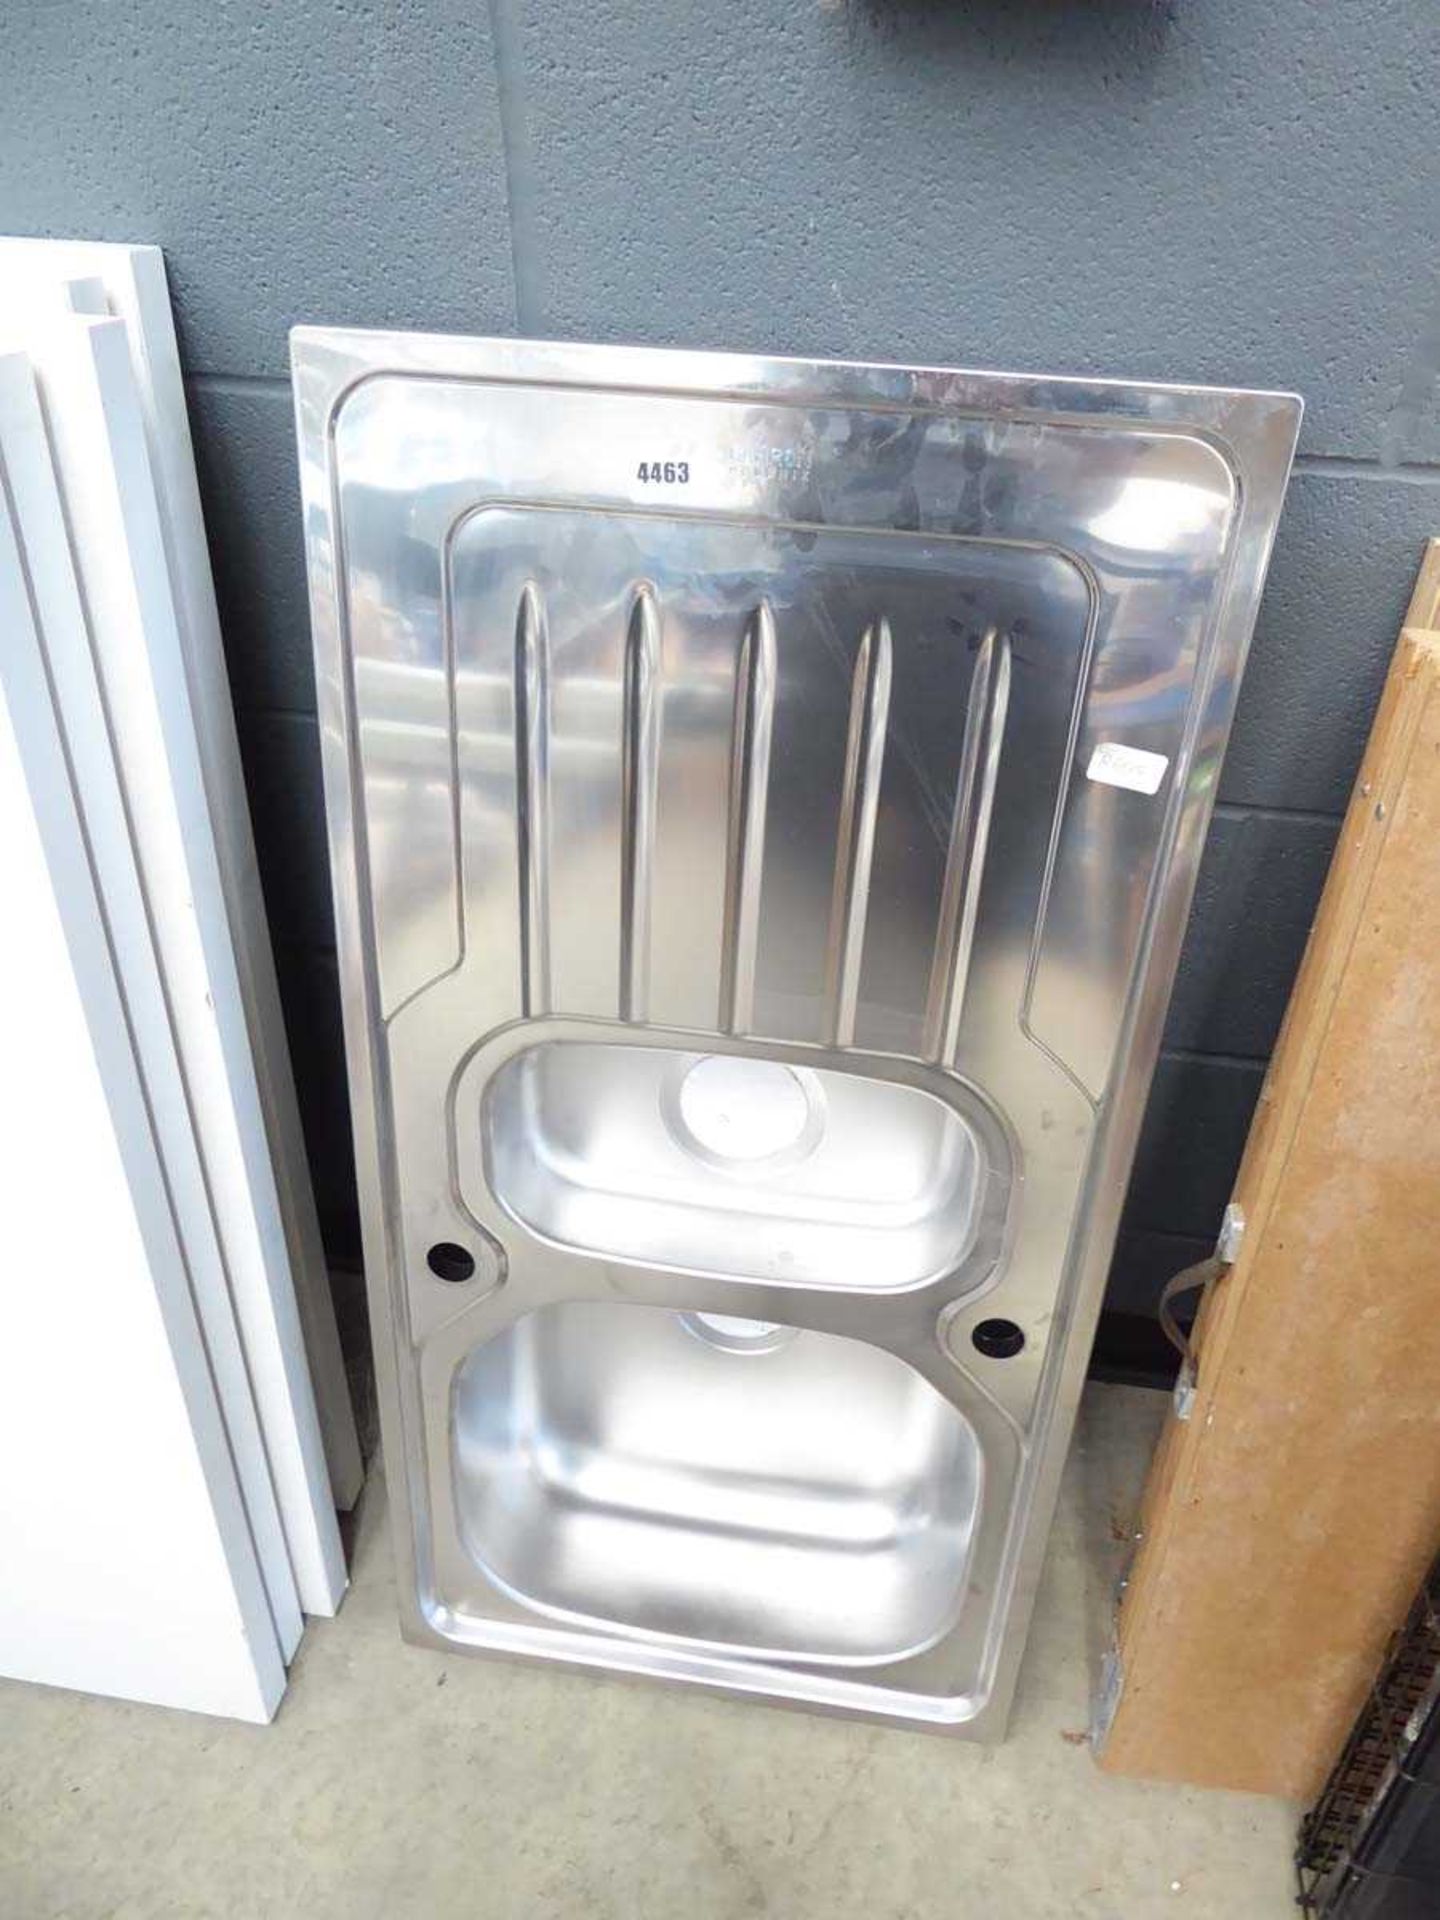 3 x 1.5 bowls stainless steel sinks